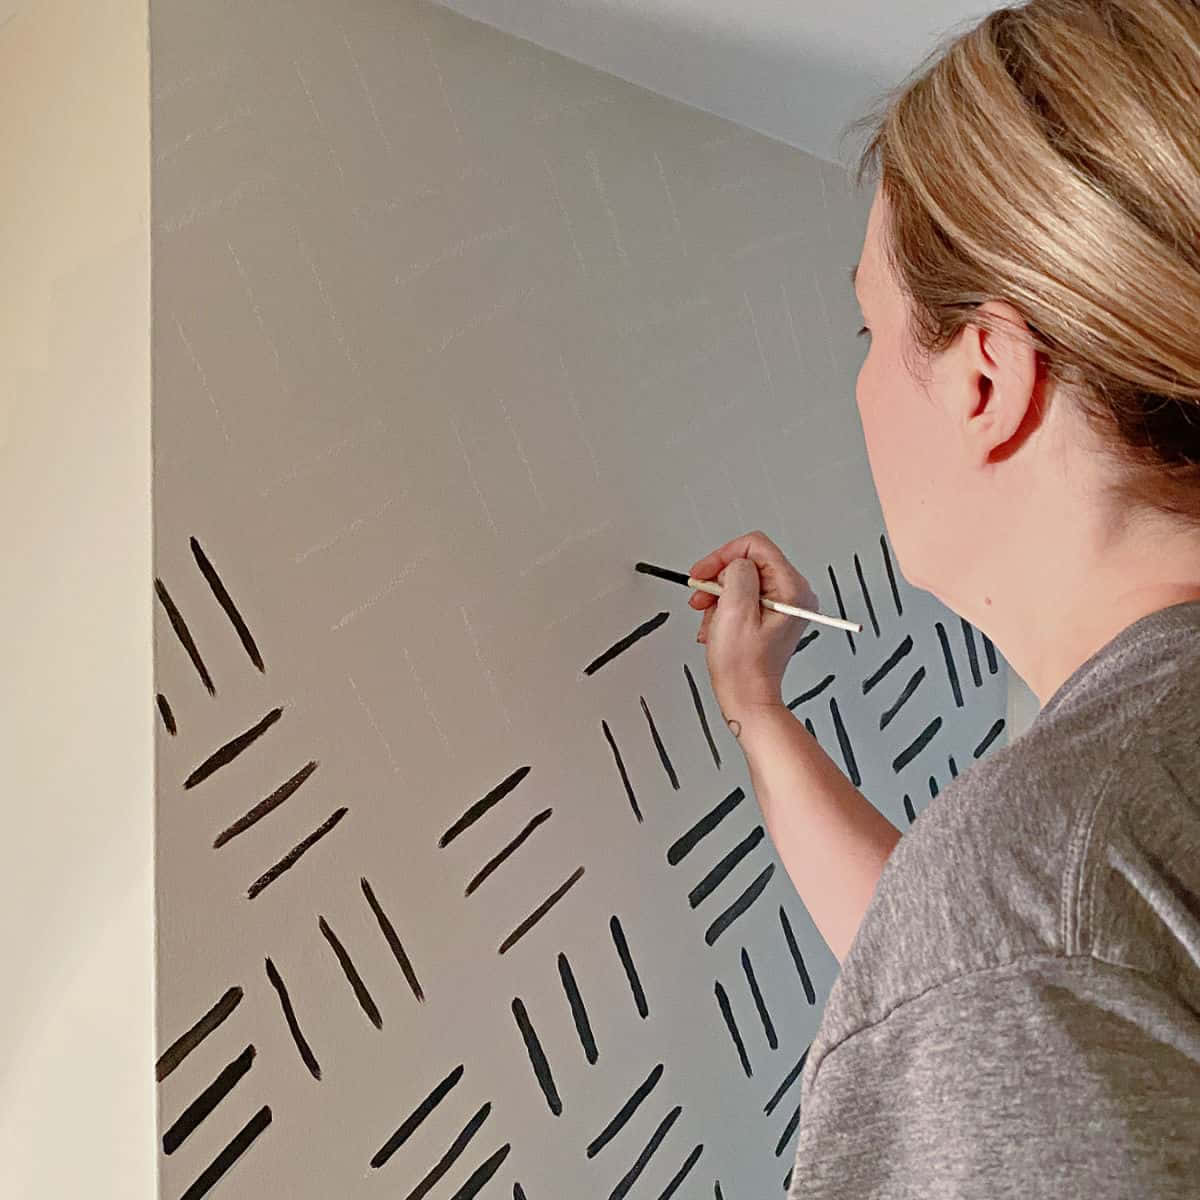 A Woman Painting A Wall With Black And White Stripes